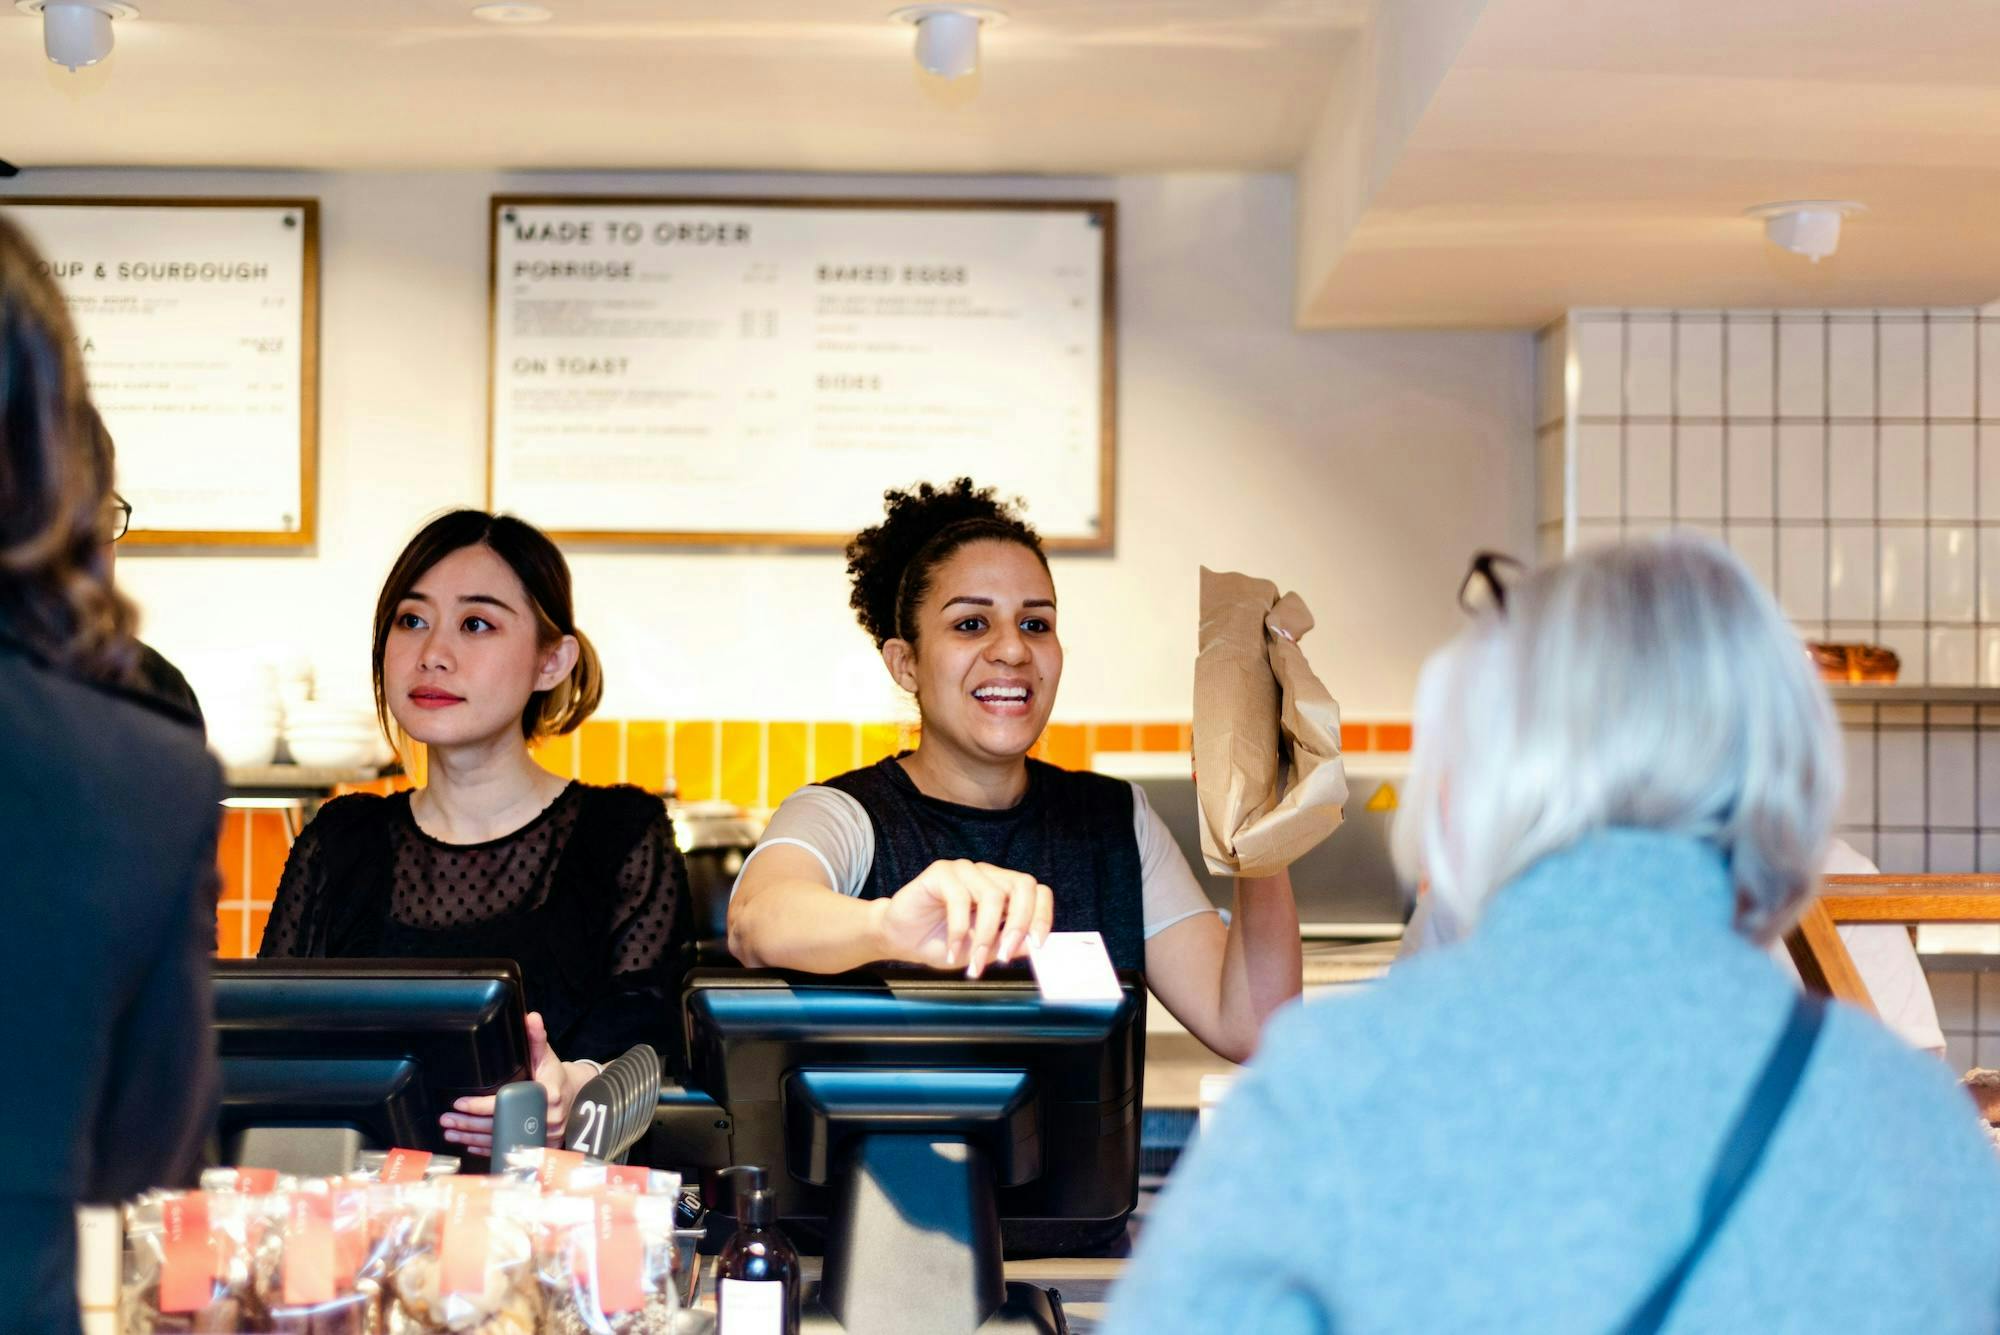 Two team members serving customers from behind a till